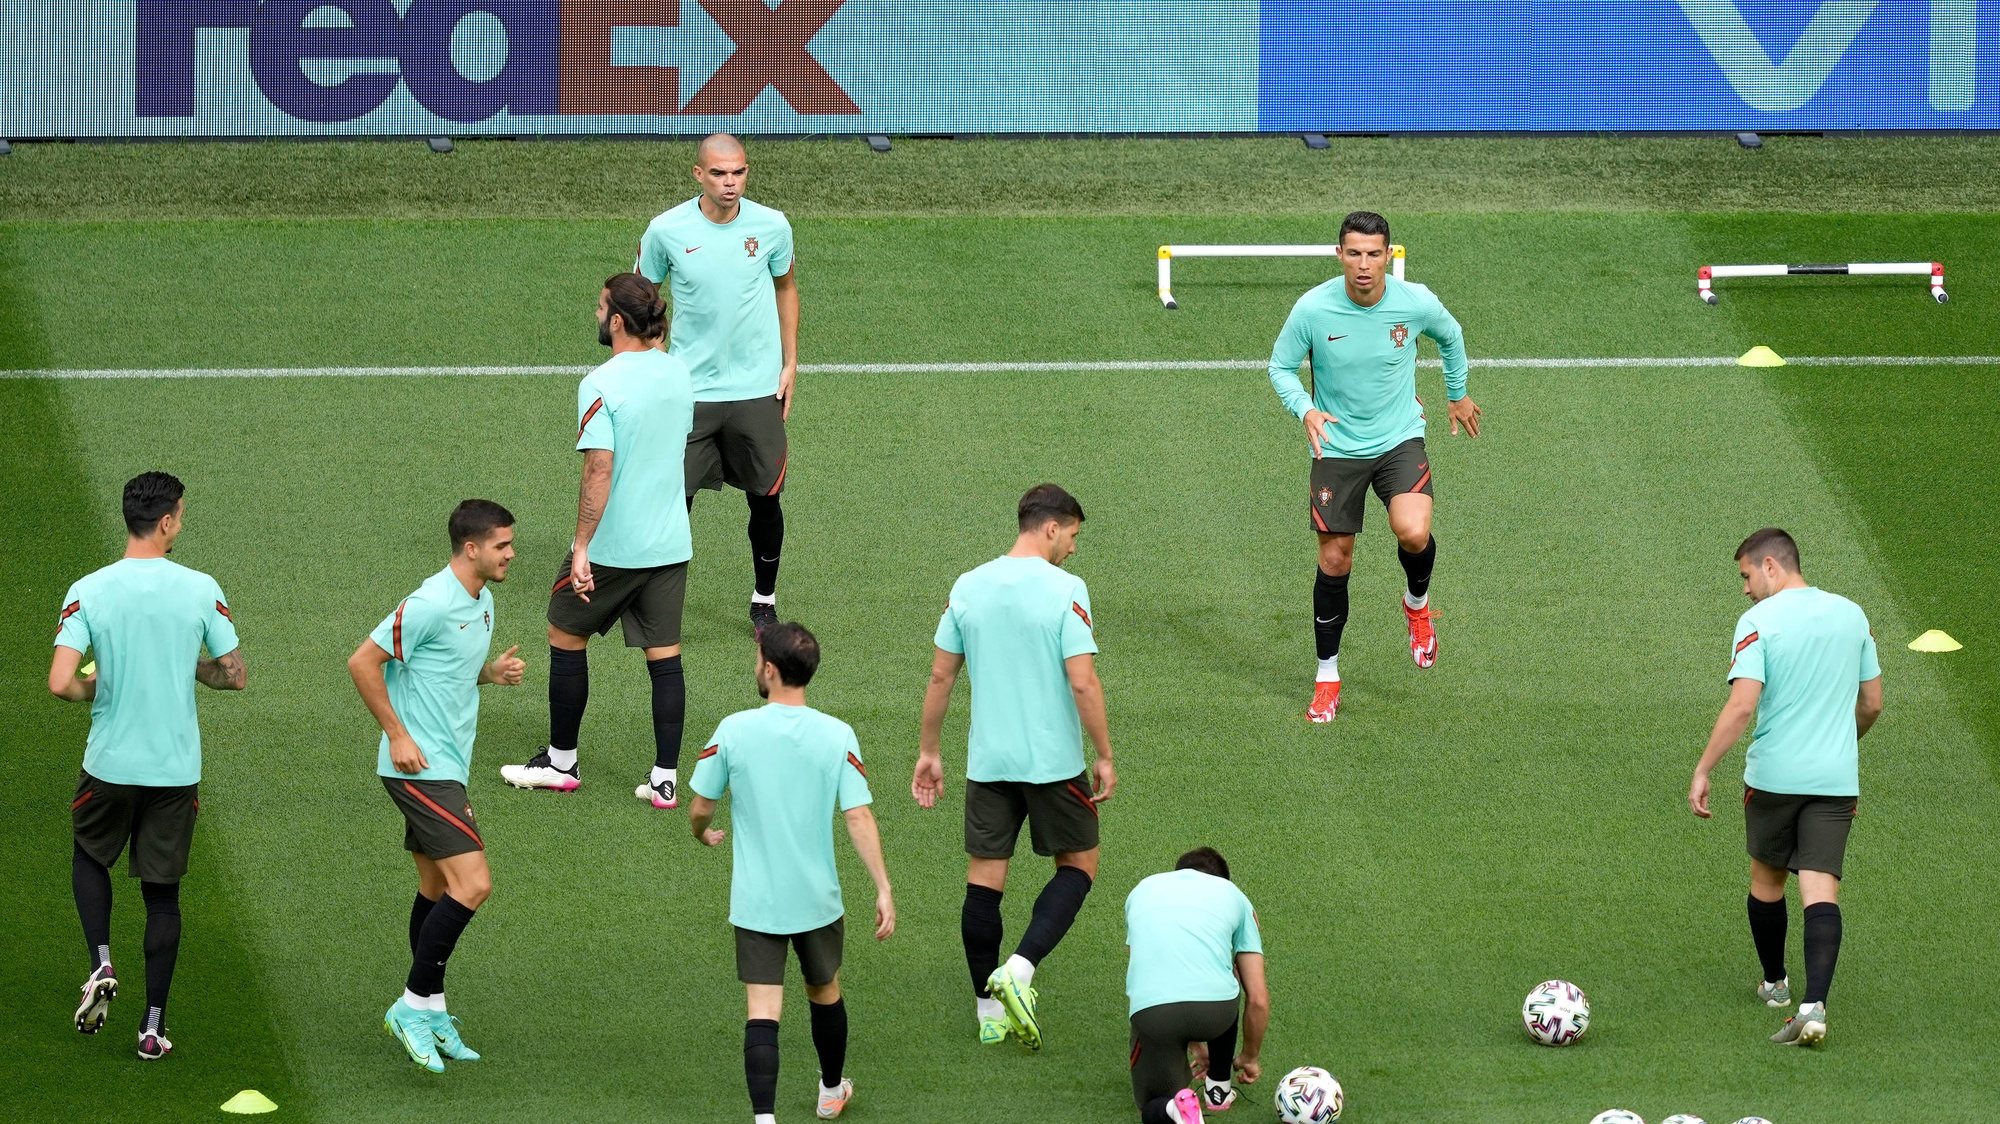 Portugal´s national soccer team players in action during a training session at Puskás Aréna, Hungay, 14 June 2021. Portugal will face Hungay in their UEFA EURO 2020 group F round soccer match on 15 June 2021. HUGO DELGADO/LUSA